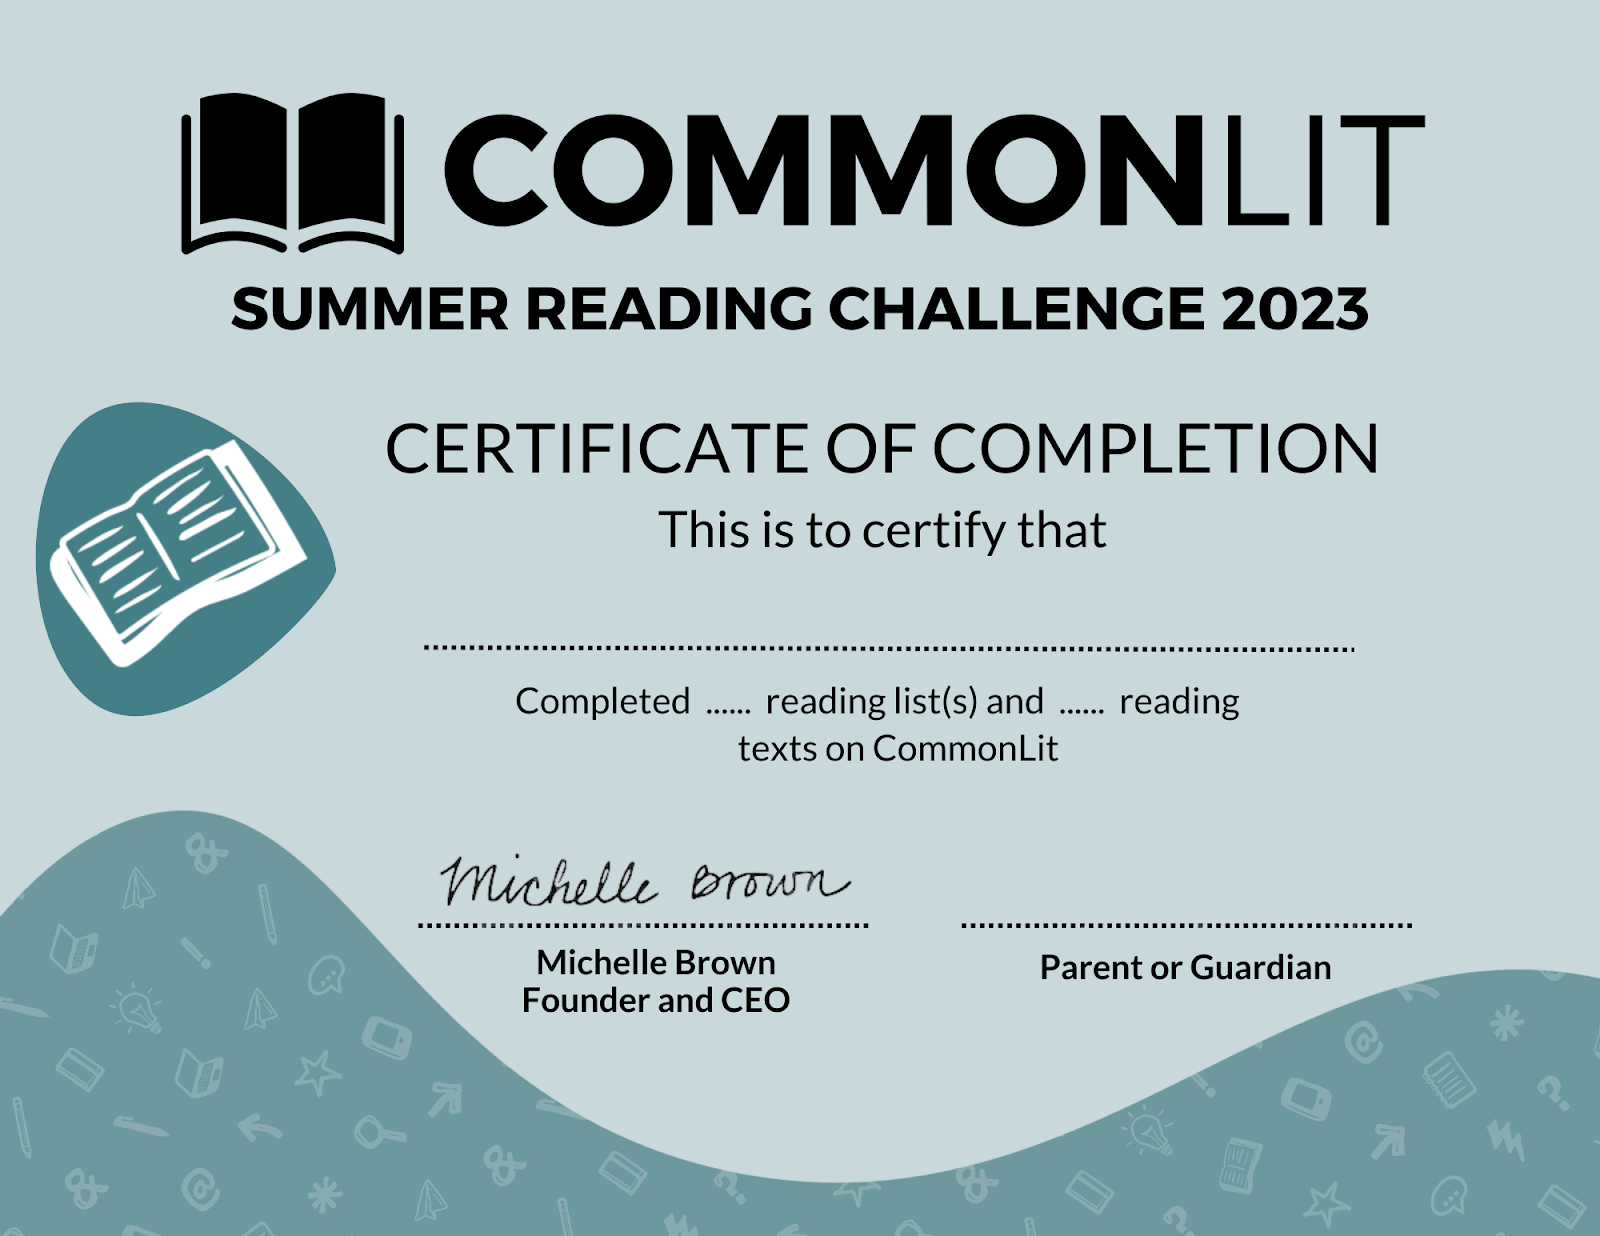 Certificate of Completion for the Summer Reading Challenge 2023